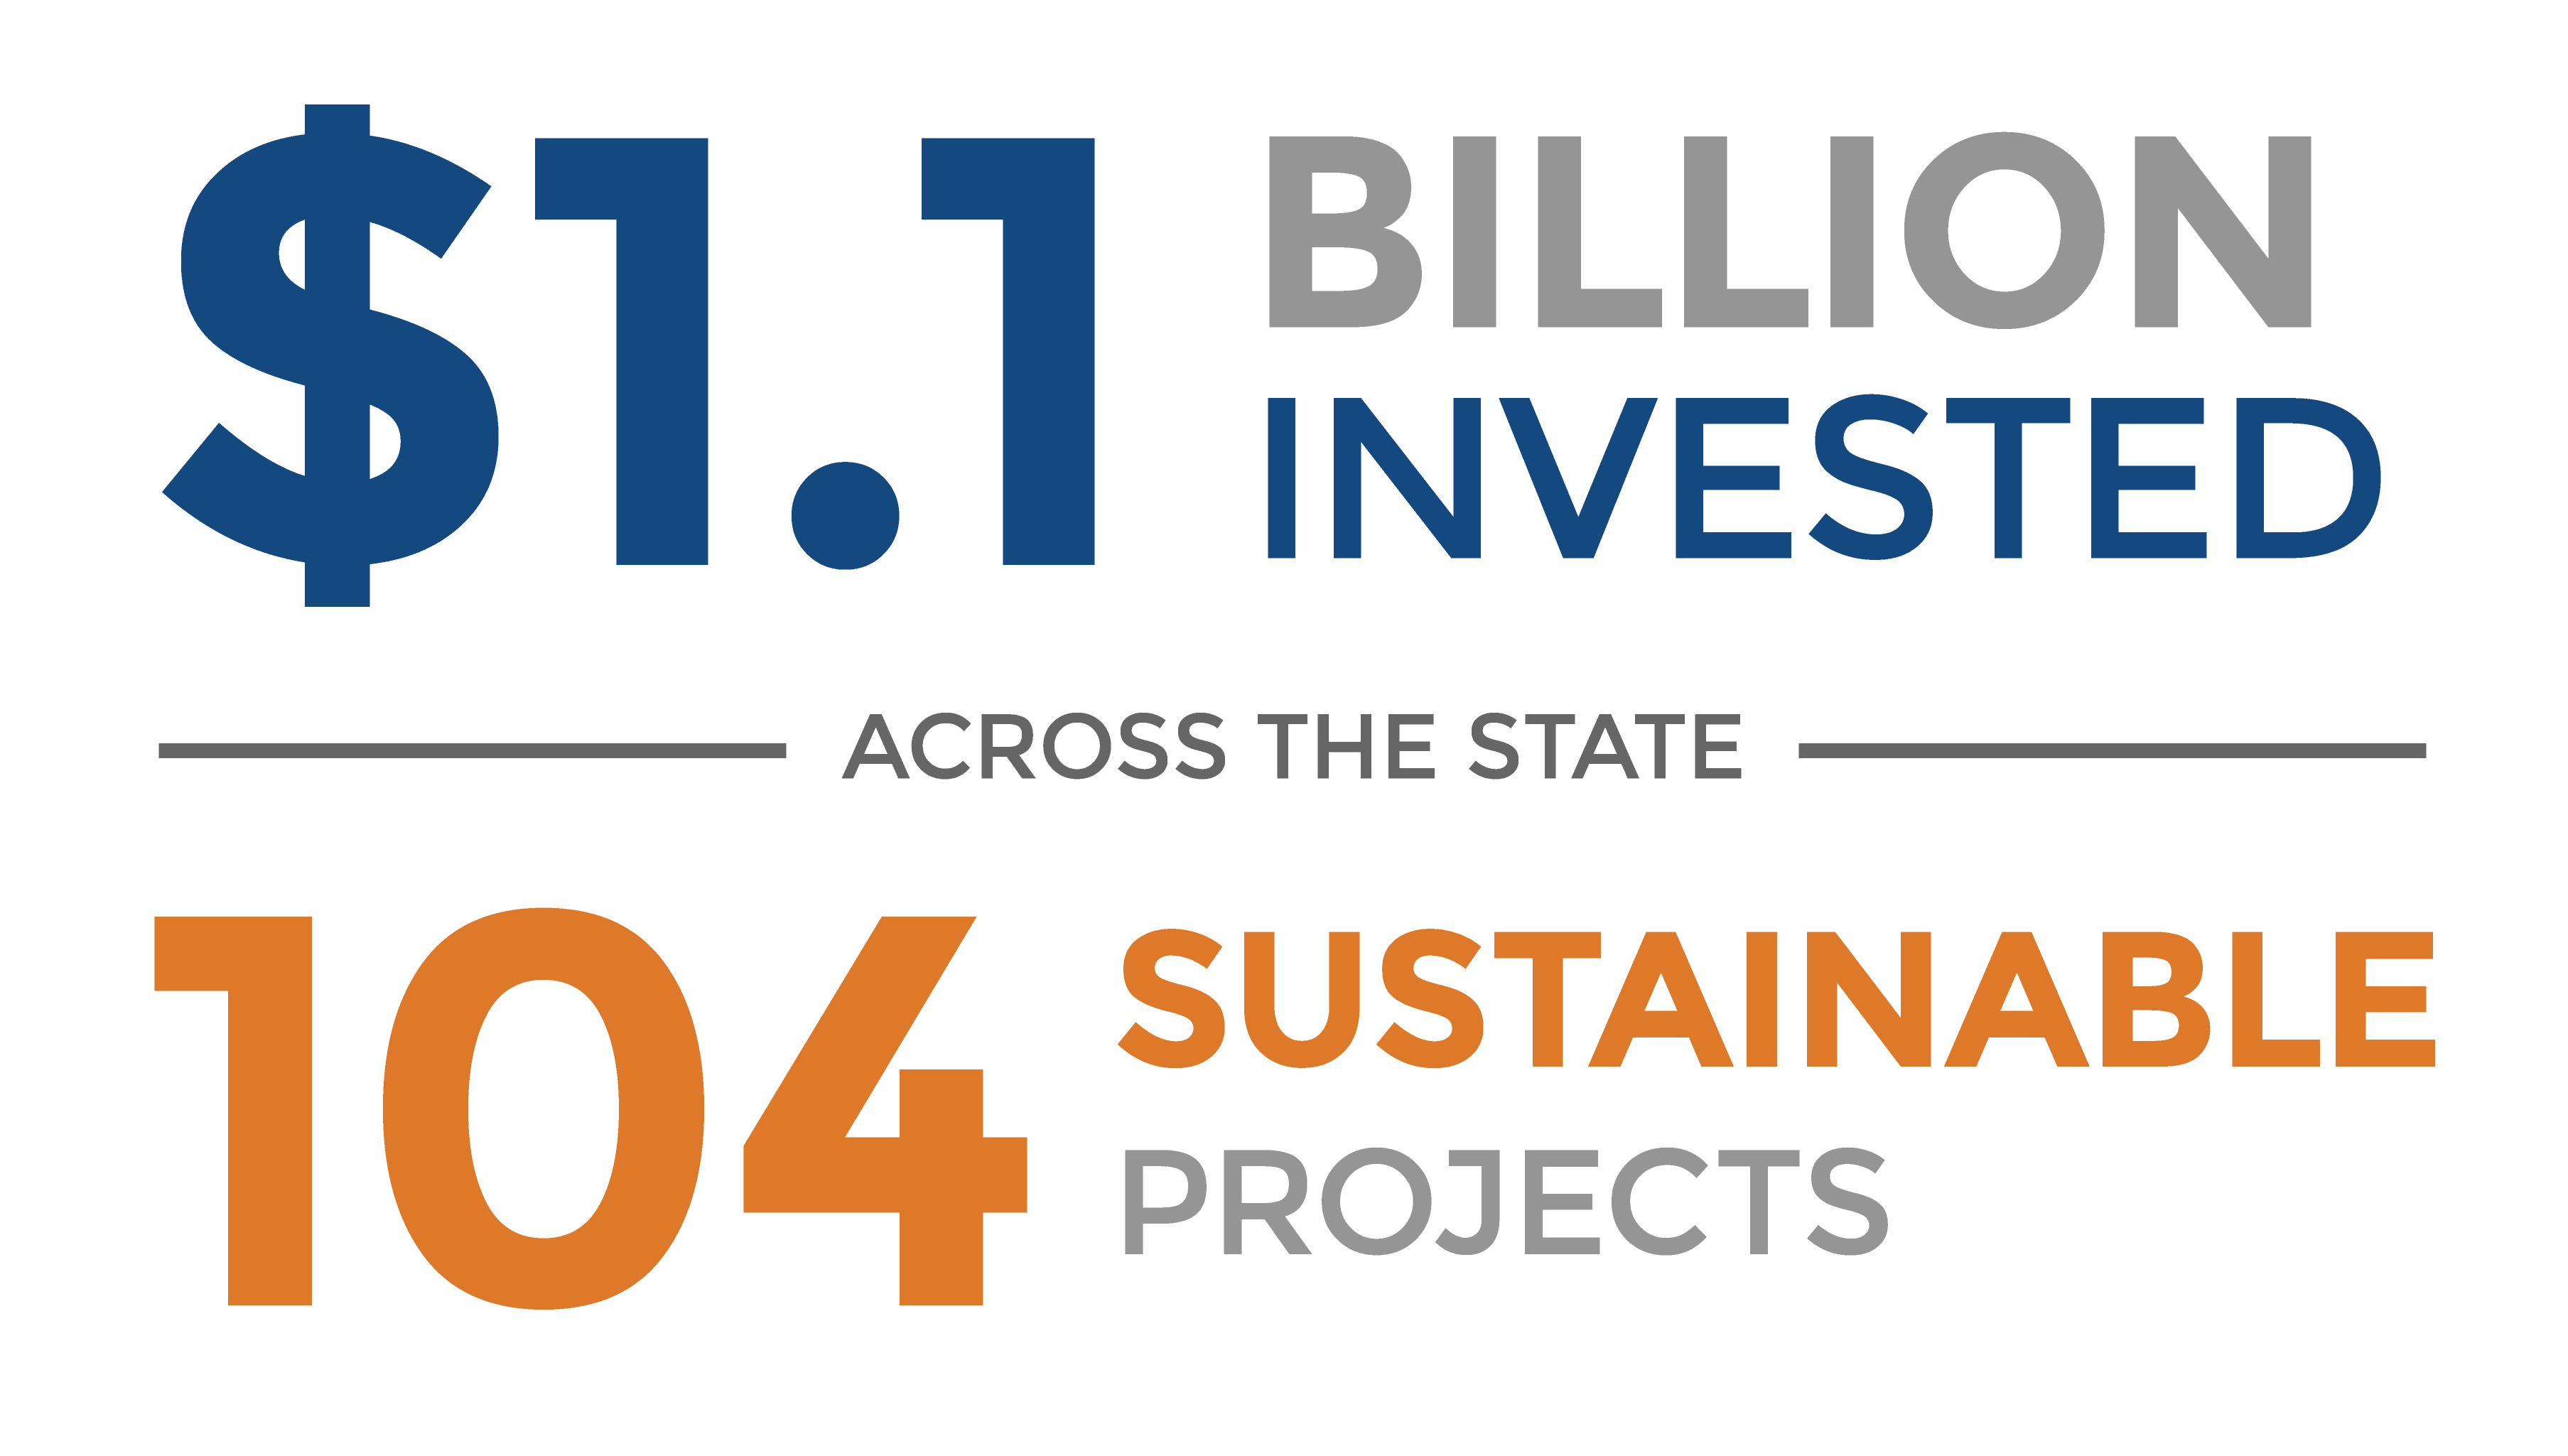 $1.1 Billion invested across the state. 104 sustainable projects.